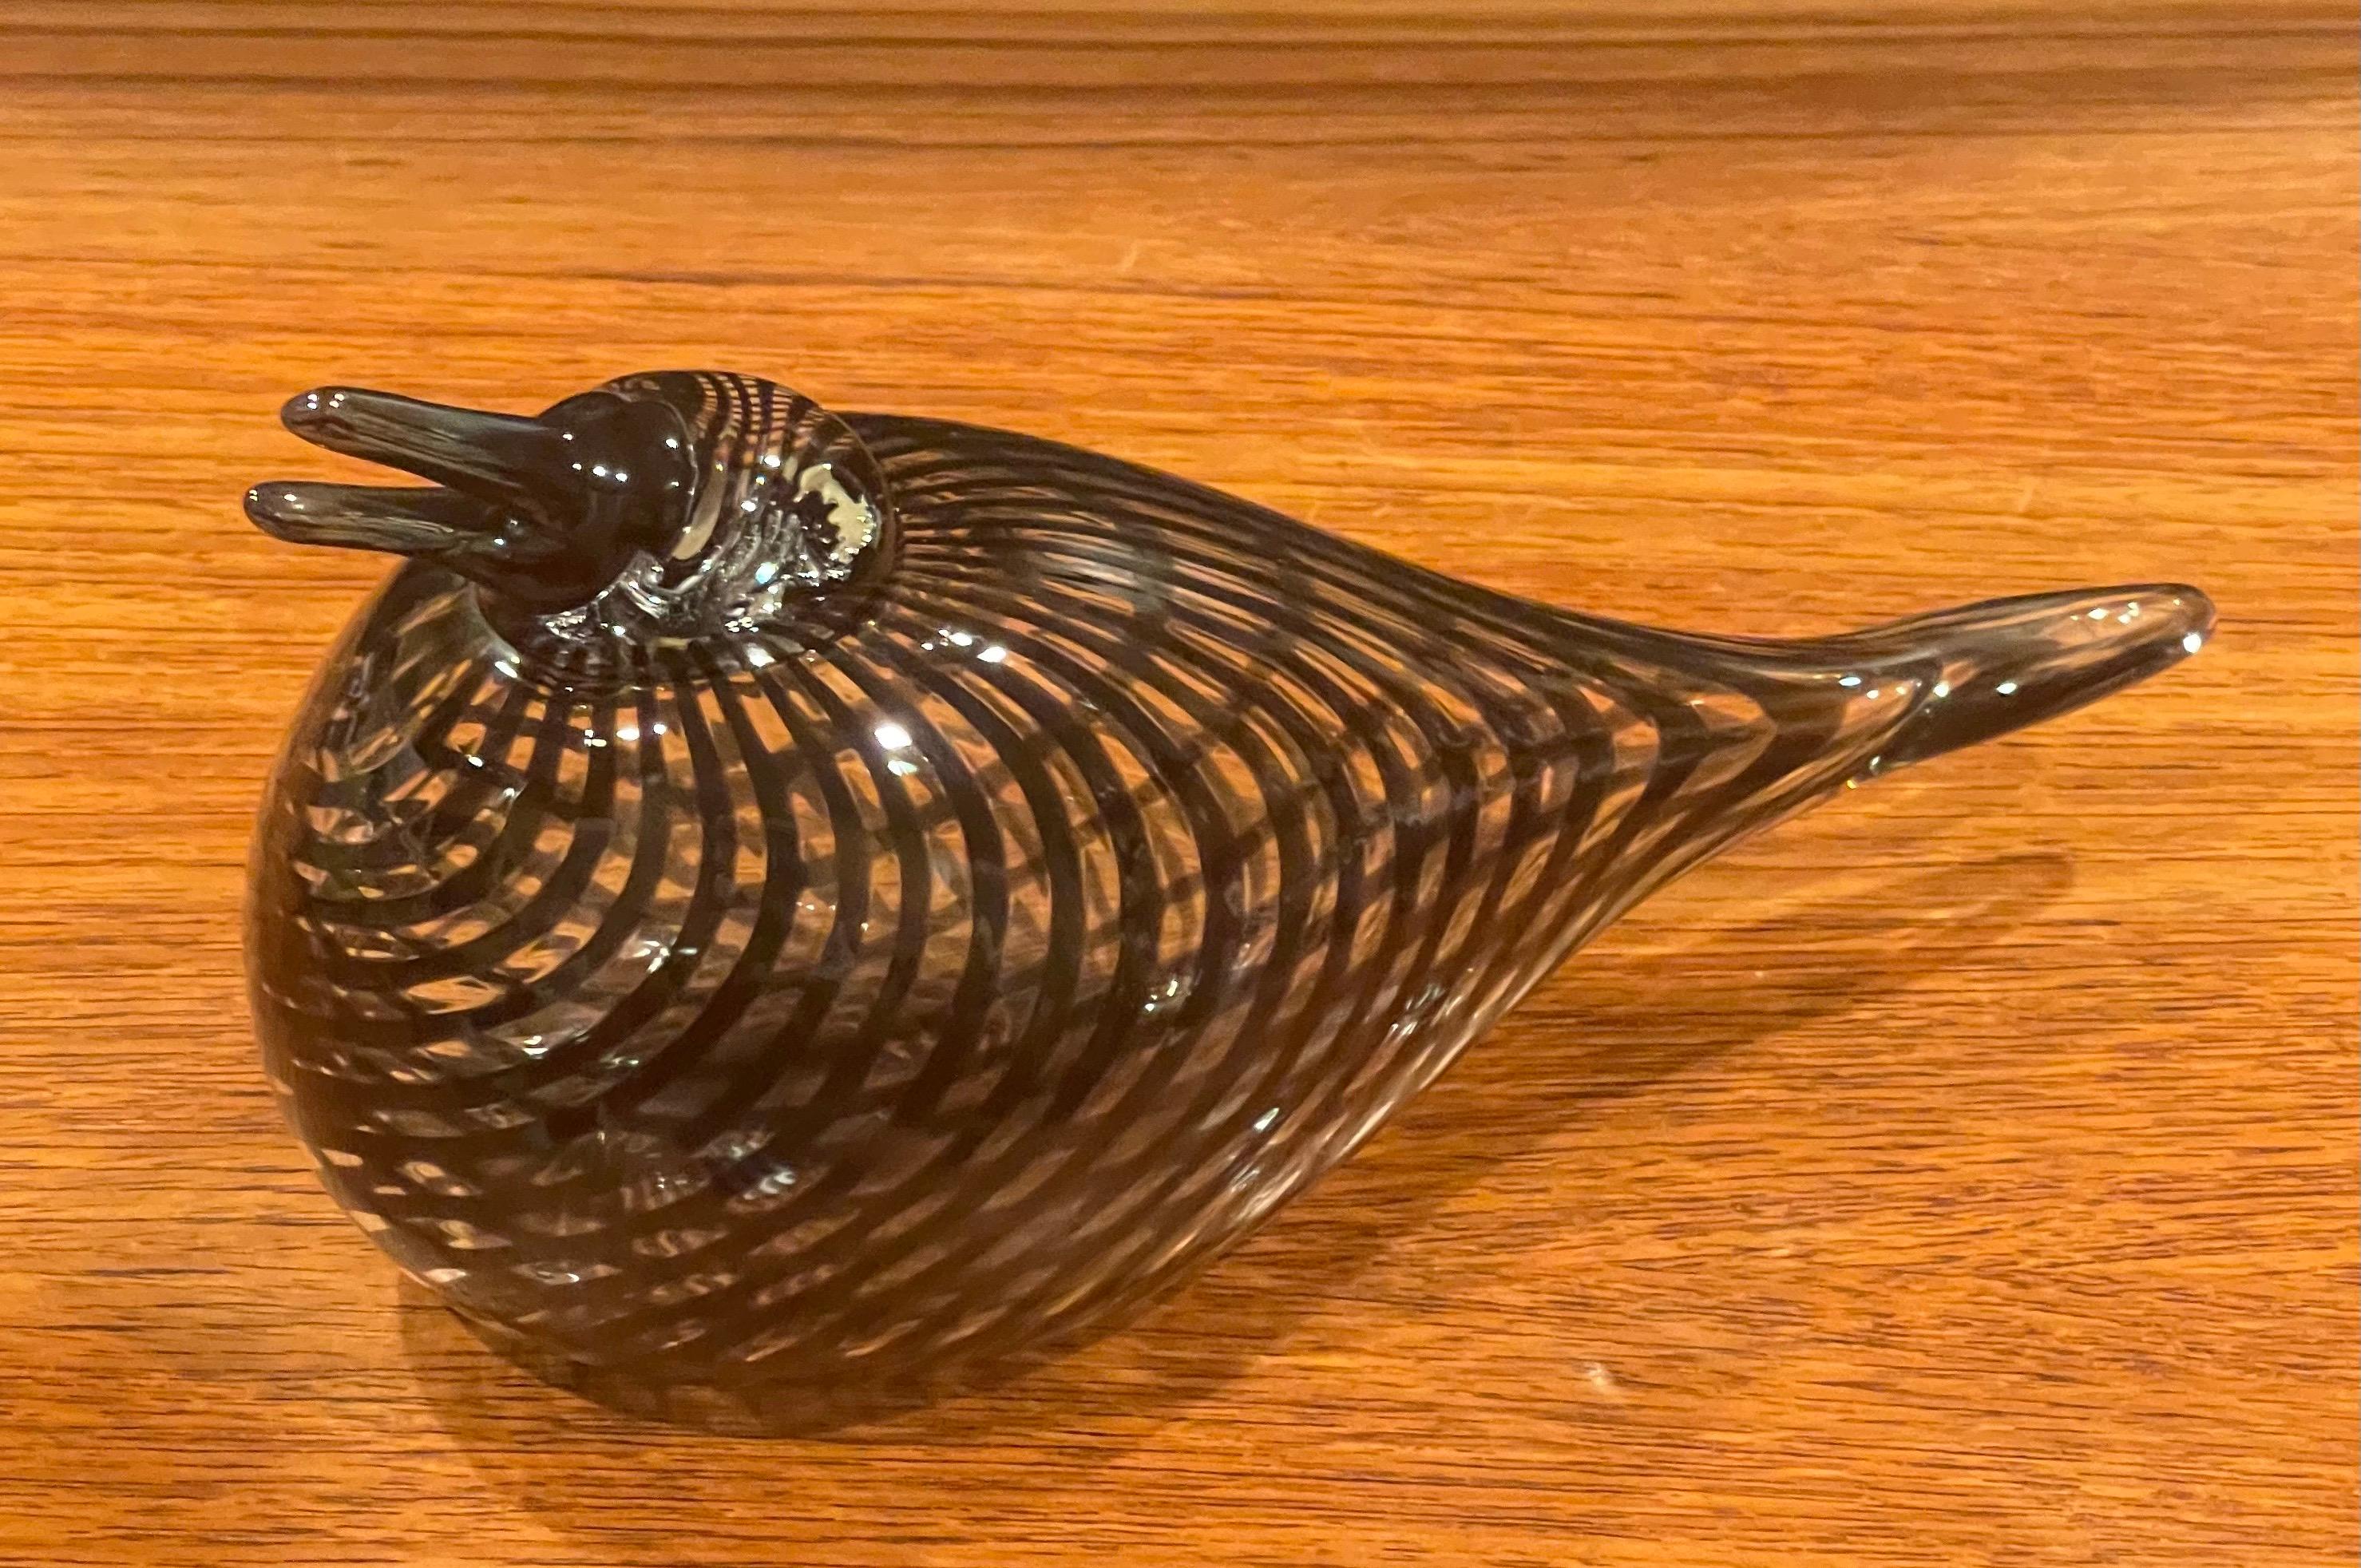 Gorgeous art glass bird sculpture by Oiva Toikka for Iittala of Finland, circa 1990s. This sculpture is mouth blown and is in great vintage condition with no chips or cracks. The piece measures 10